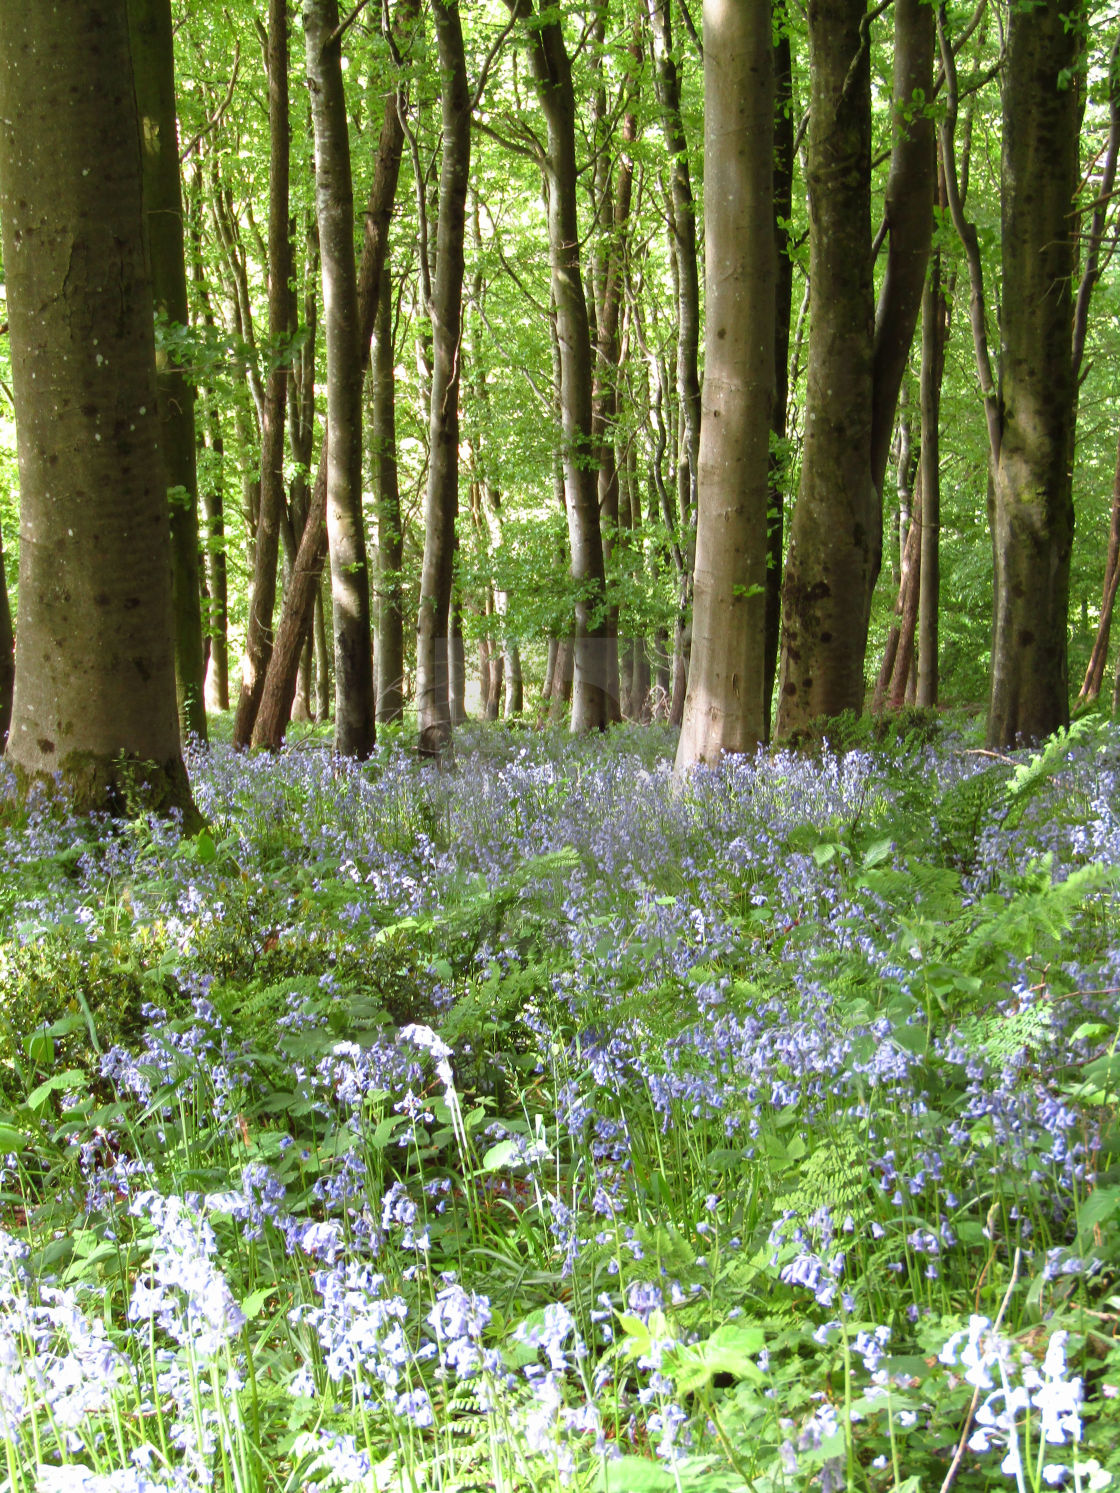 "Bluebells in the forest" stock image